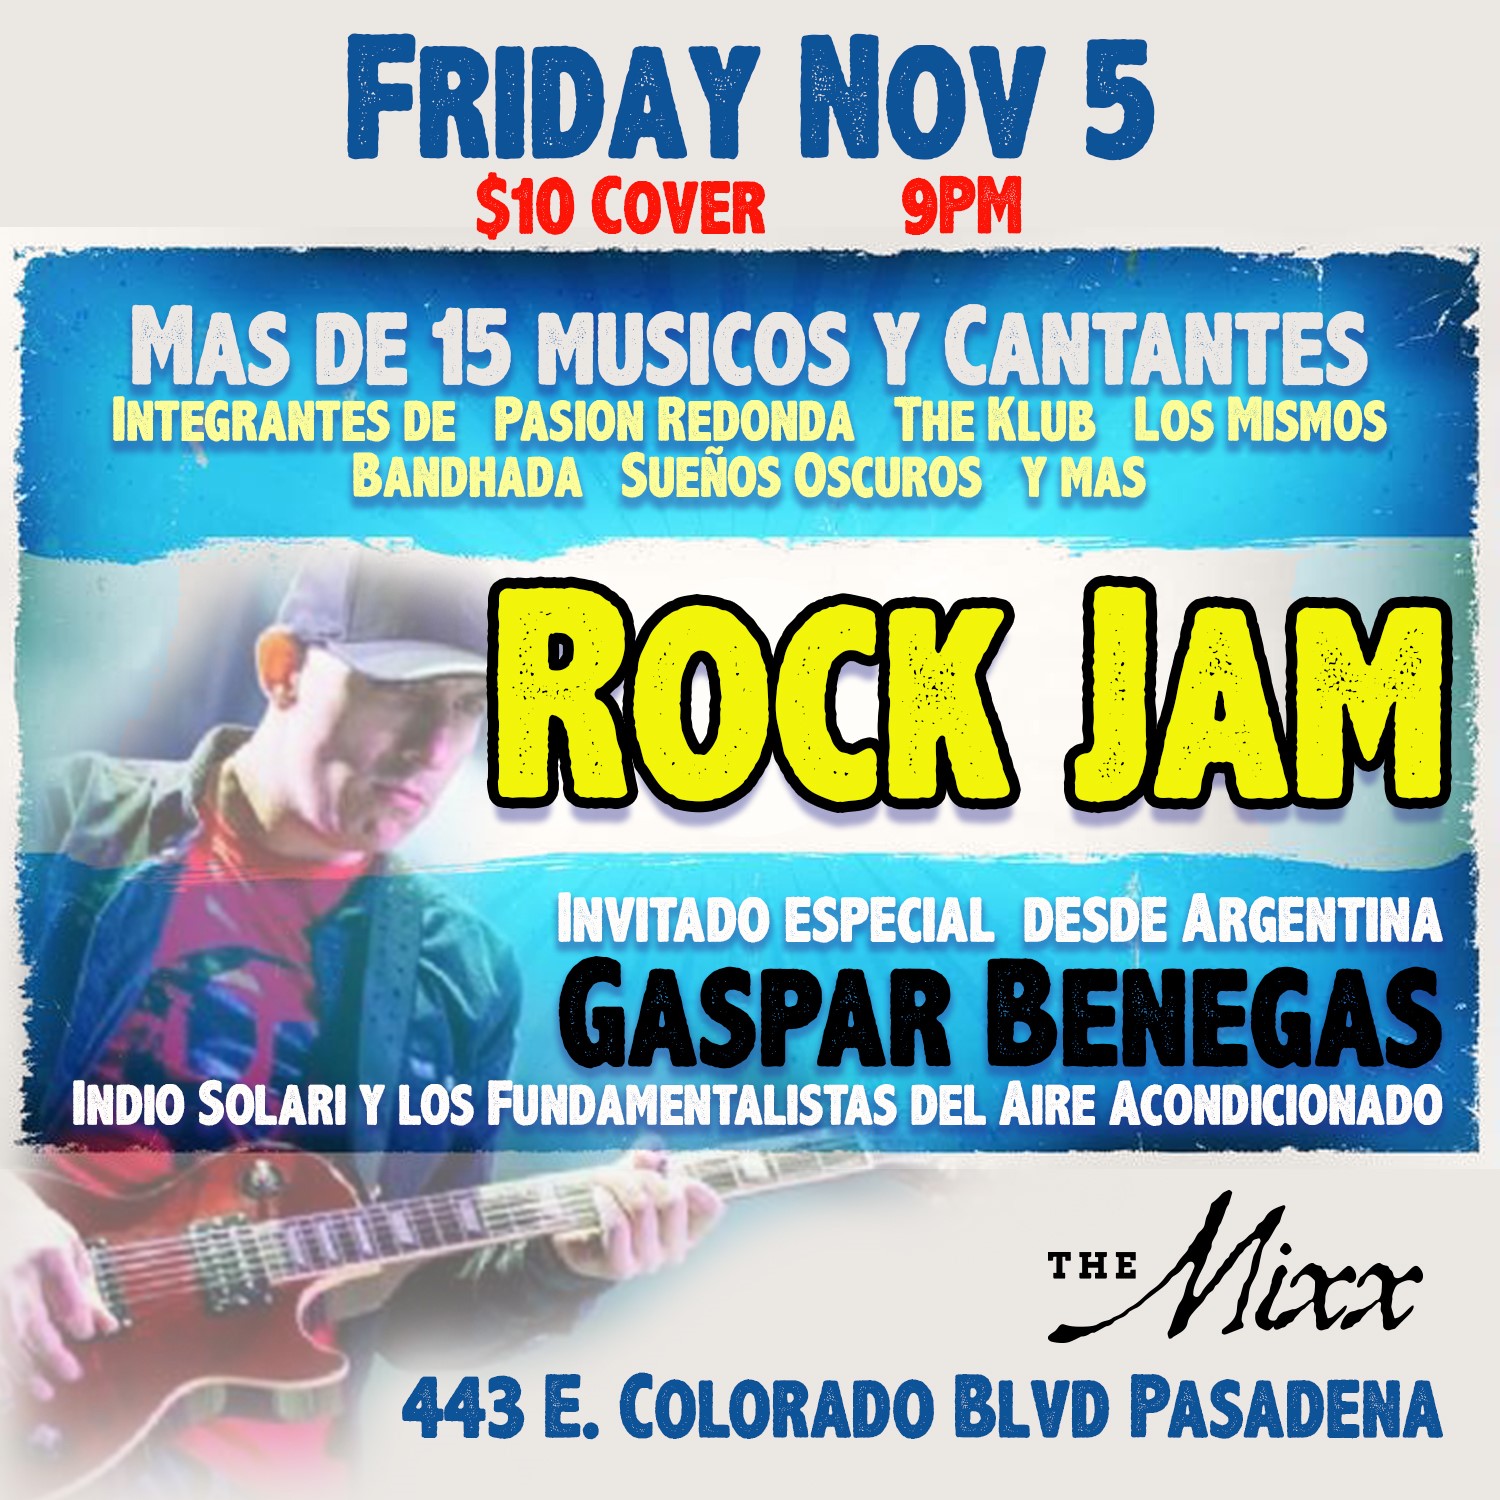 You are currently viewing Rock Jam at The Mixx with Gaspar Benegas